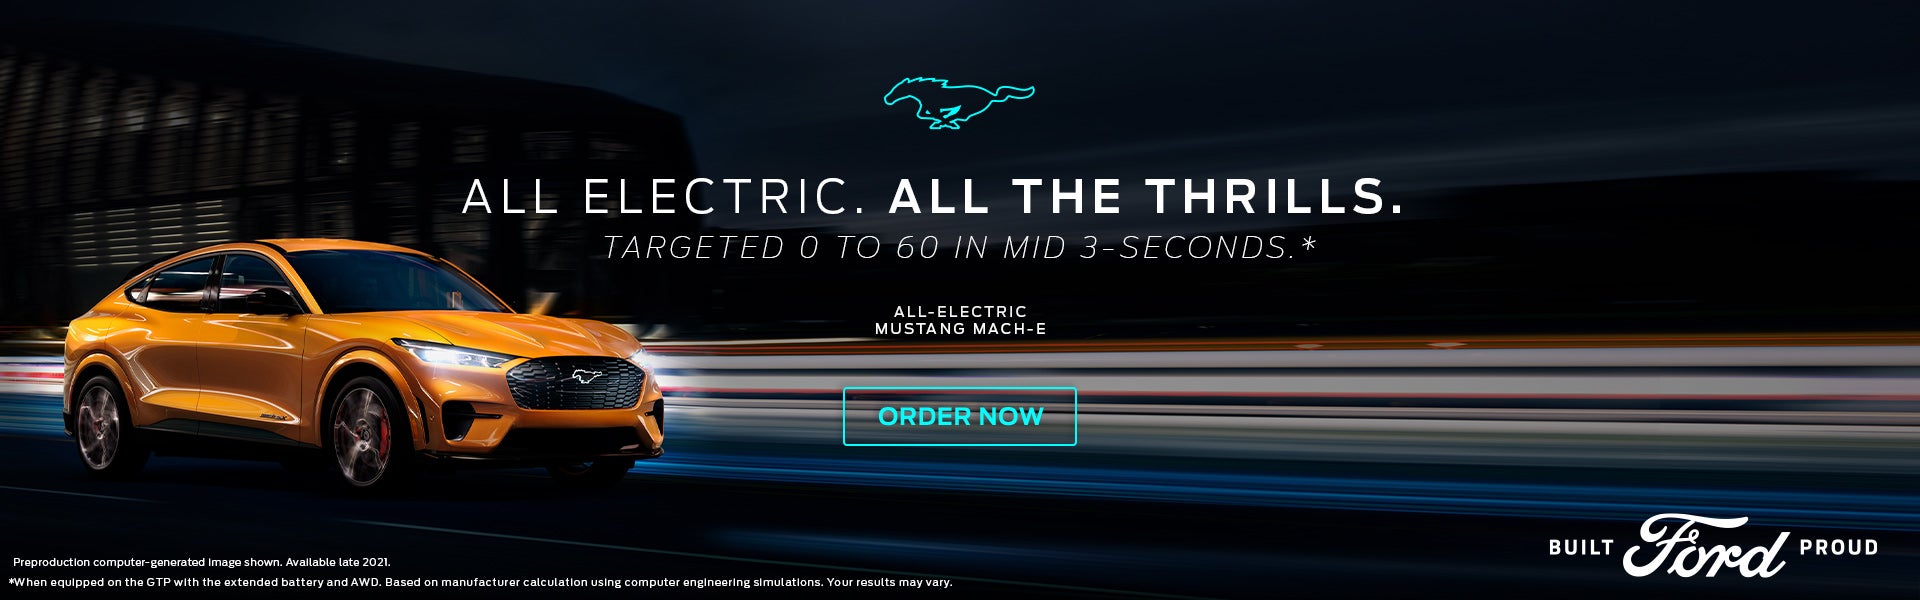 All Electric. All the Thrills.